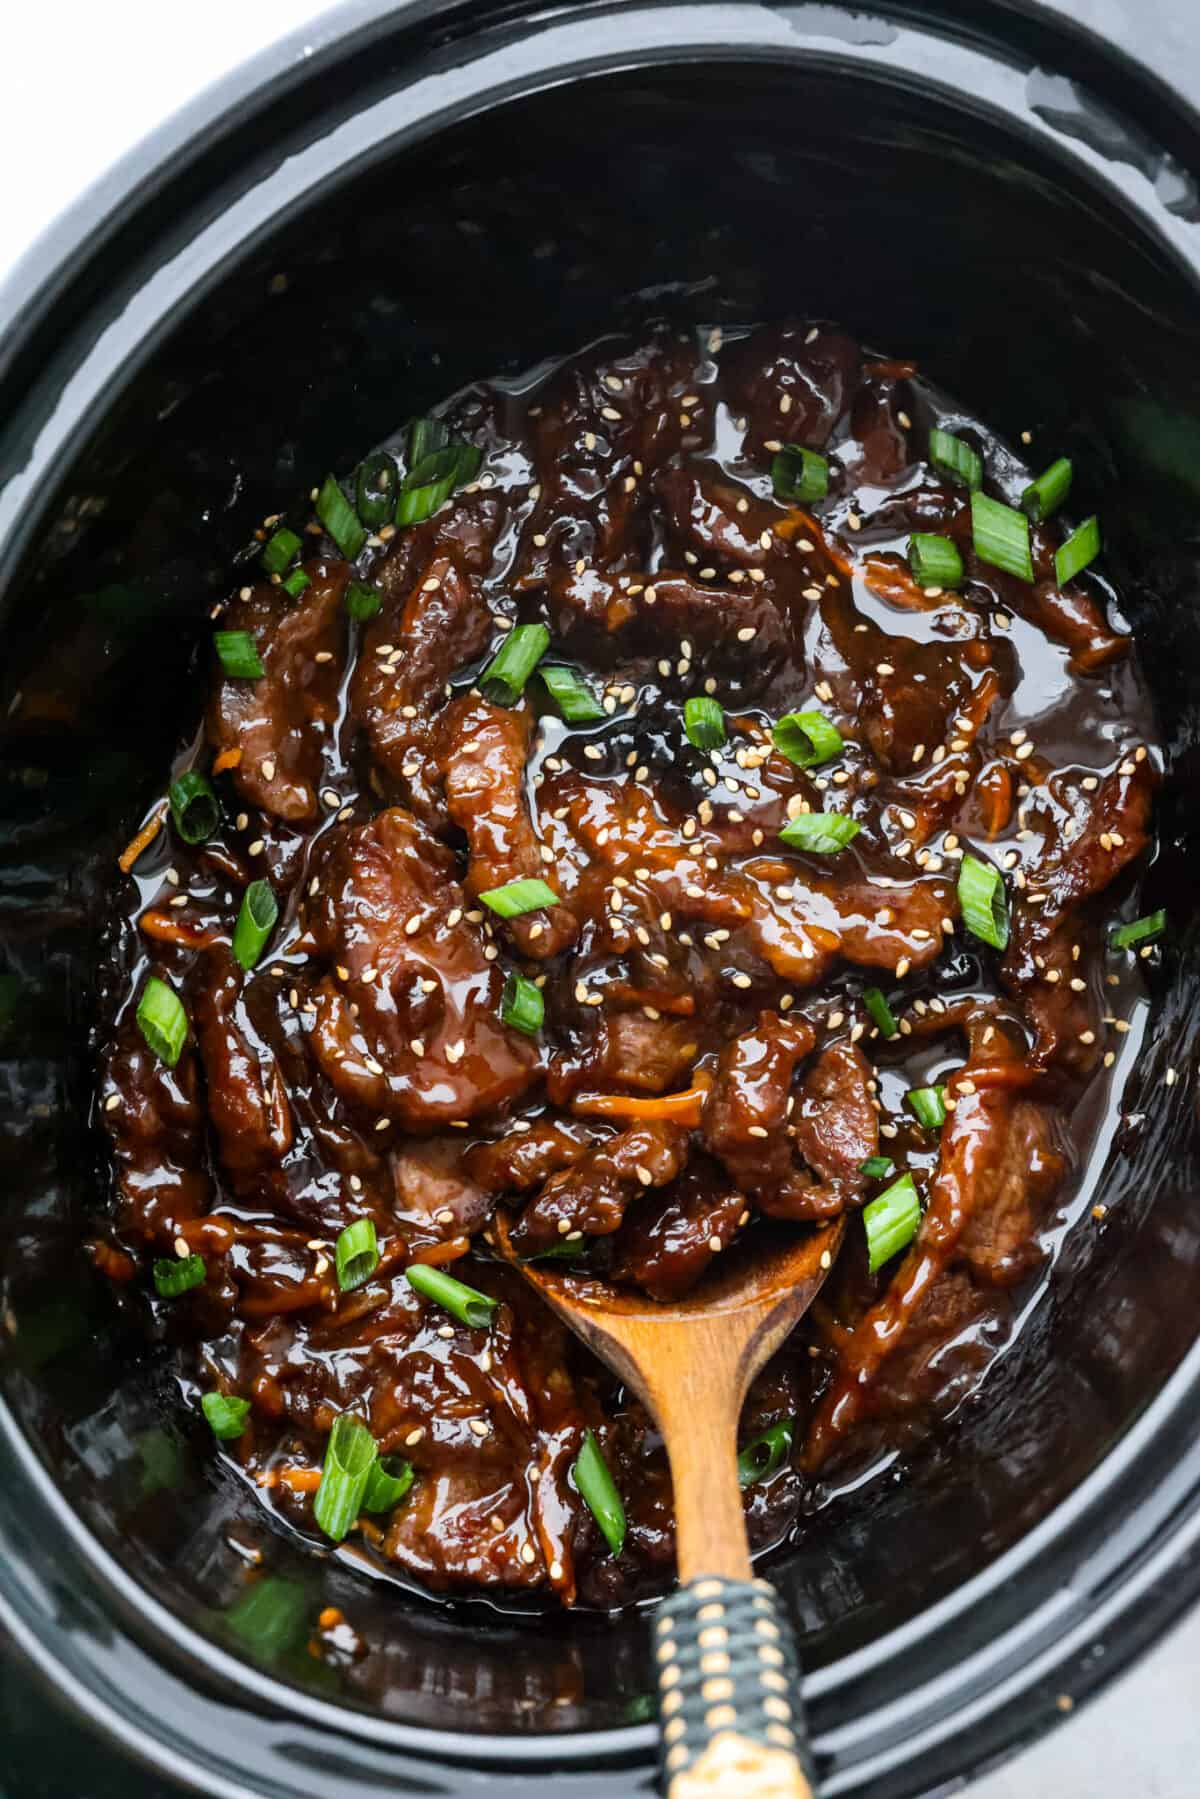 Top view of slow cooker mongolian beef in a black crock pot. A wooden spoon is in the crockpot.